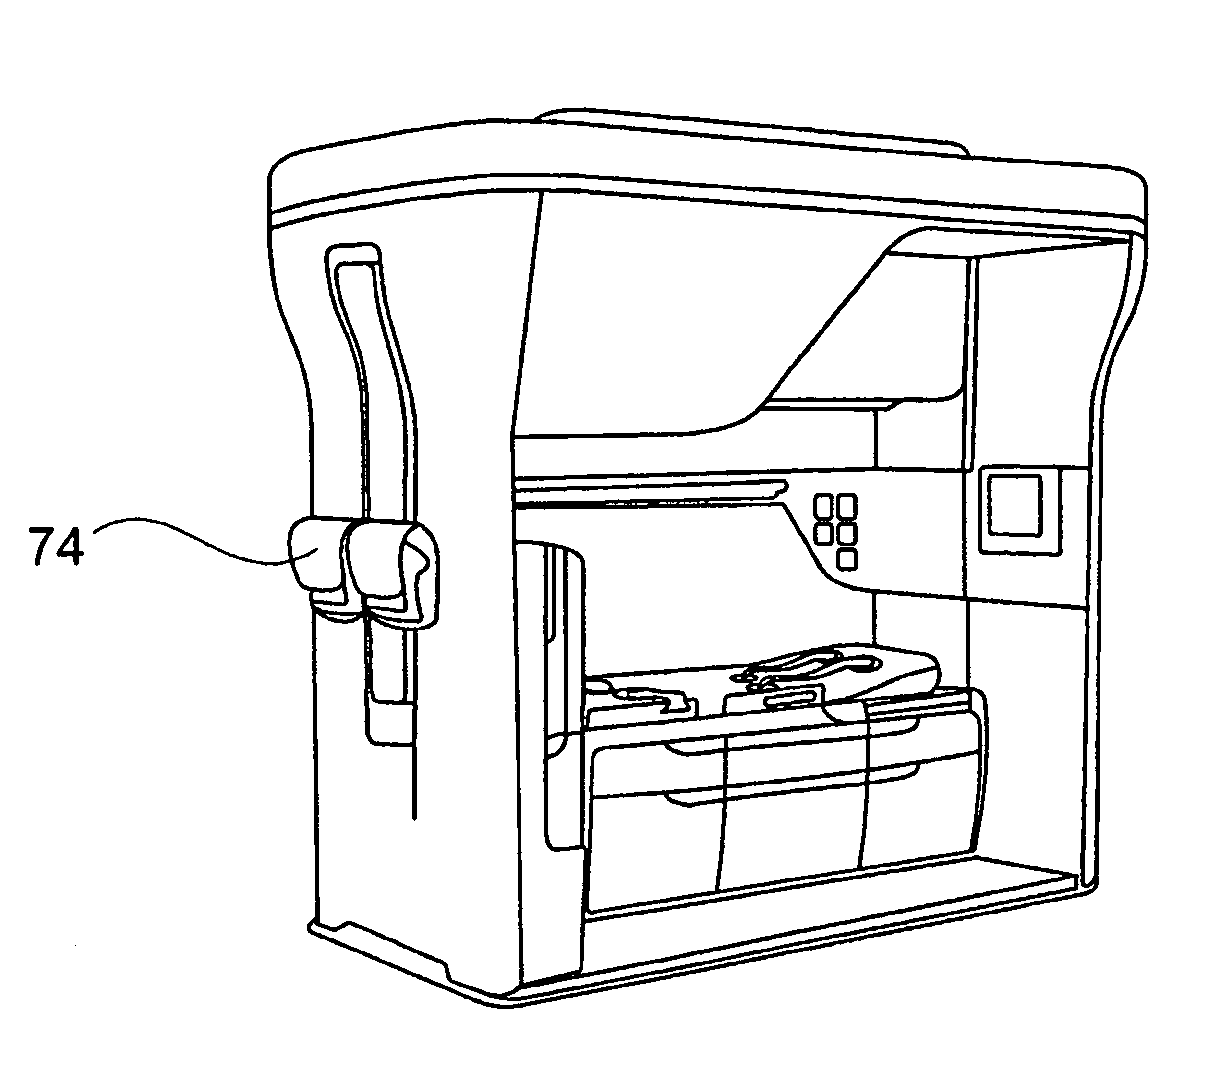 Device for the transport and medical care of patients as well as for the provision of emergency medical care in an aircraft